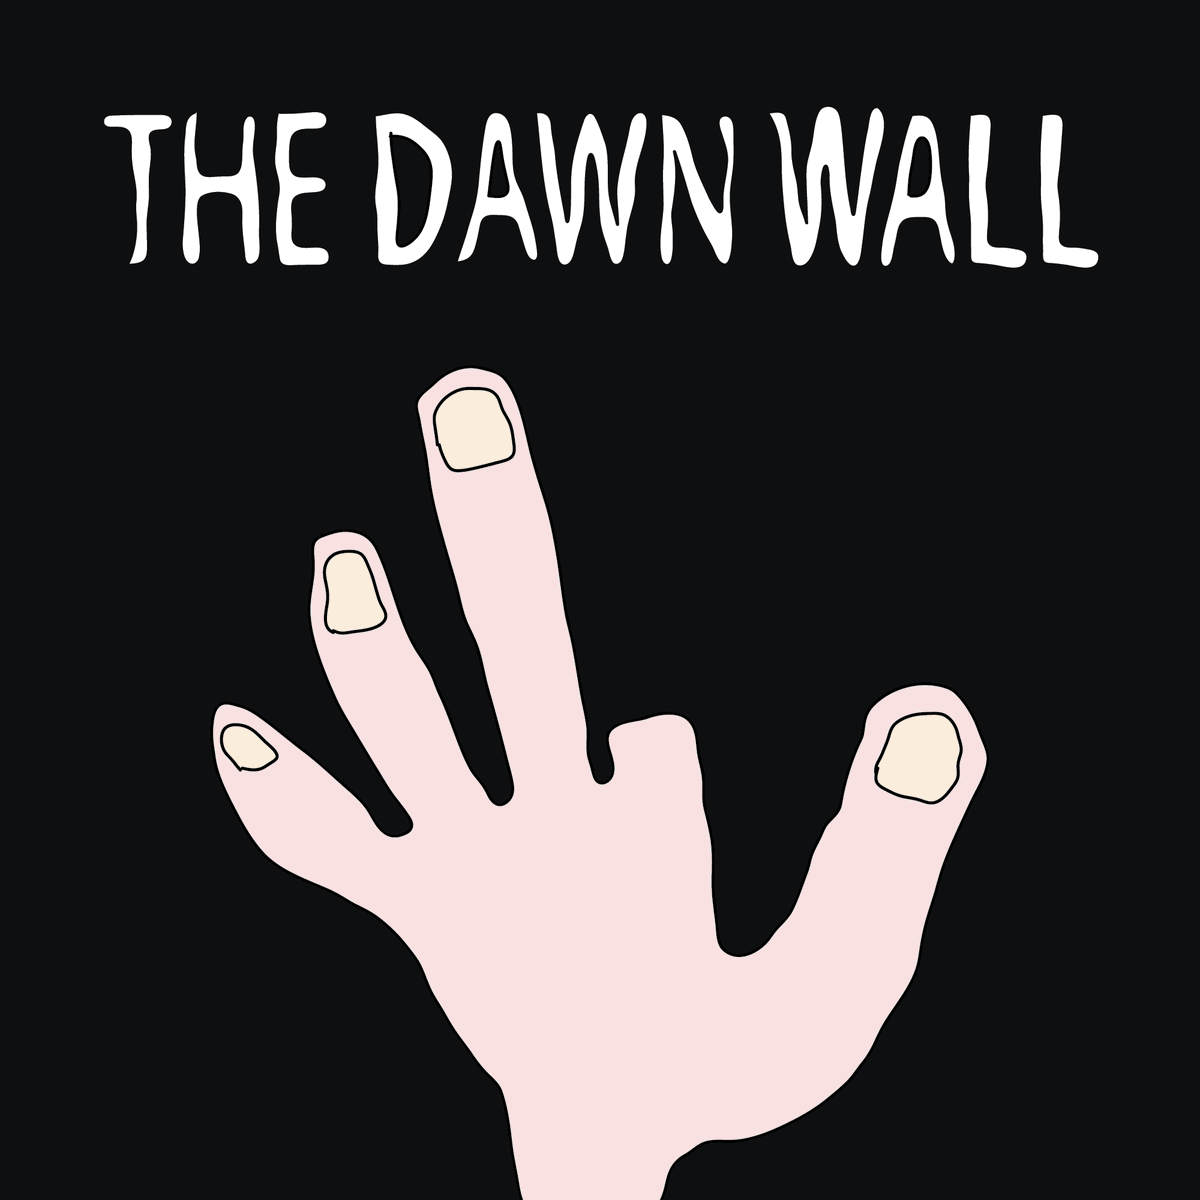 April is for documentaries on @nafmcpodcast so I watched The Dawn Wall (2017) with El Capitan @LadyBroseph and barn climber @murrman5 Spotify - open.spotify.com/episode/2vR9Zo… Apple - podcasts.apple.com/us/podcast/the…